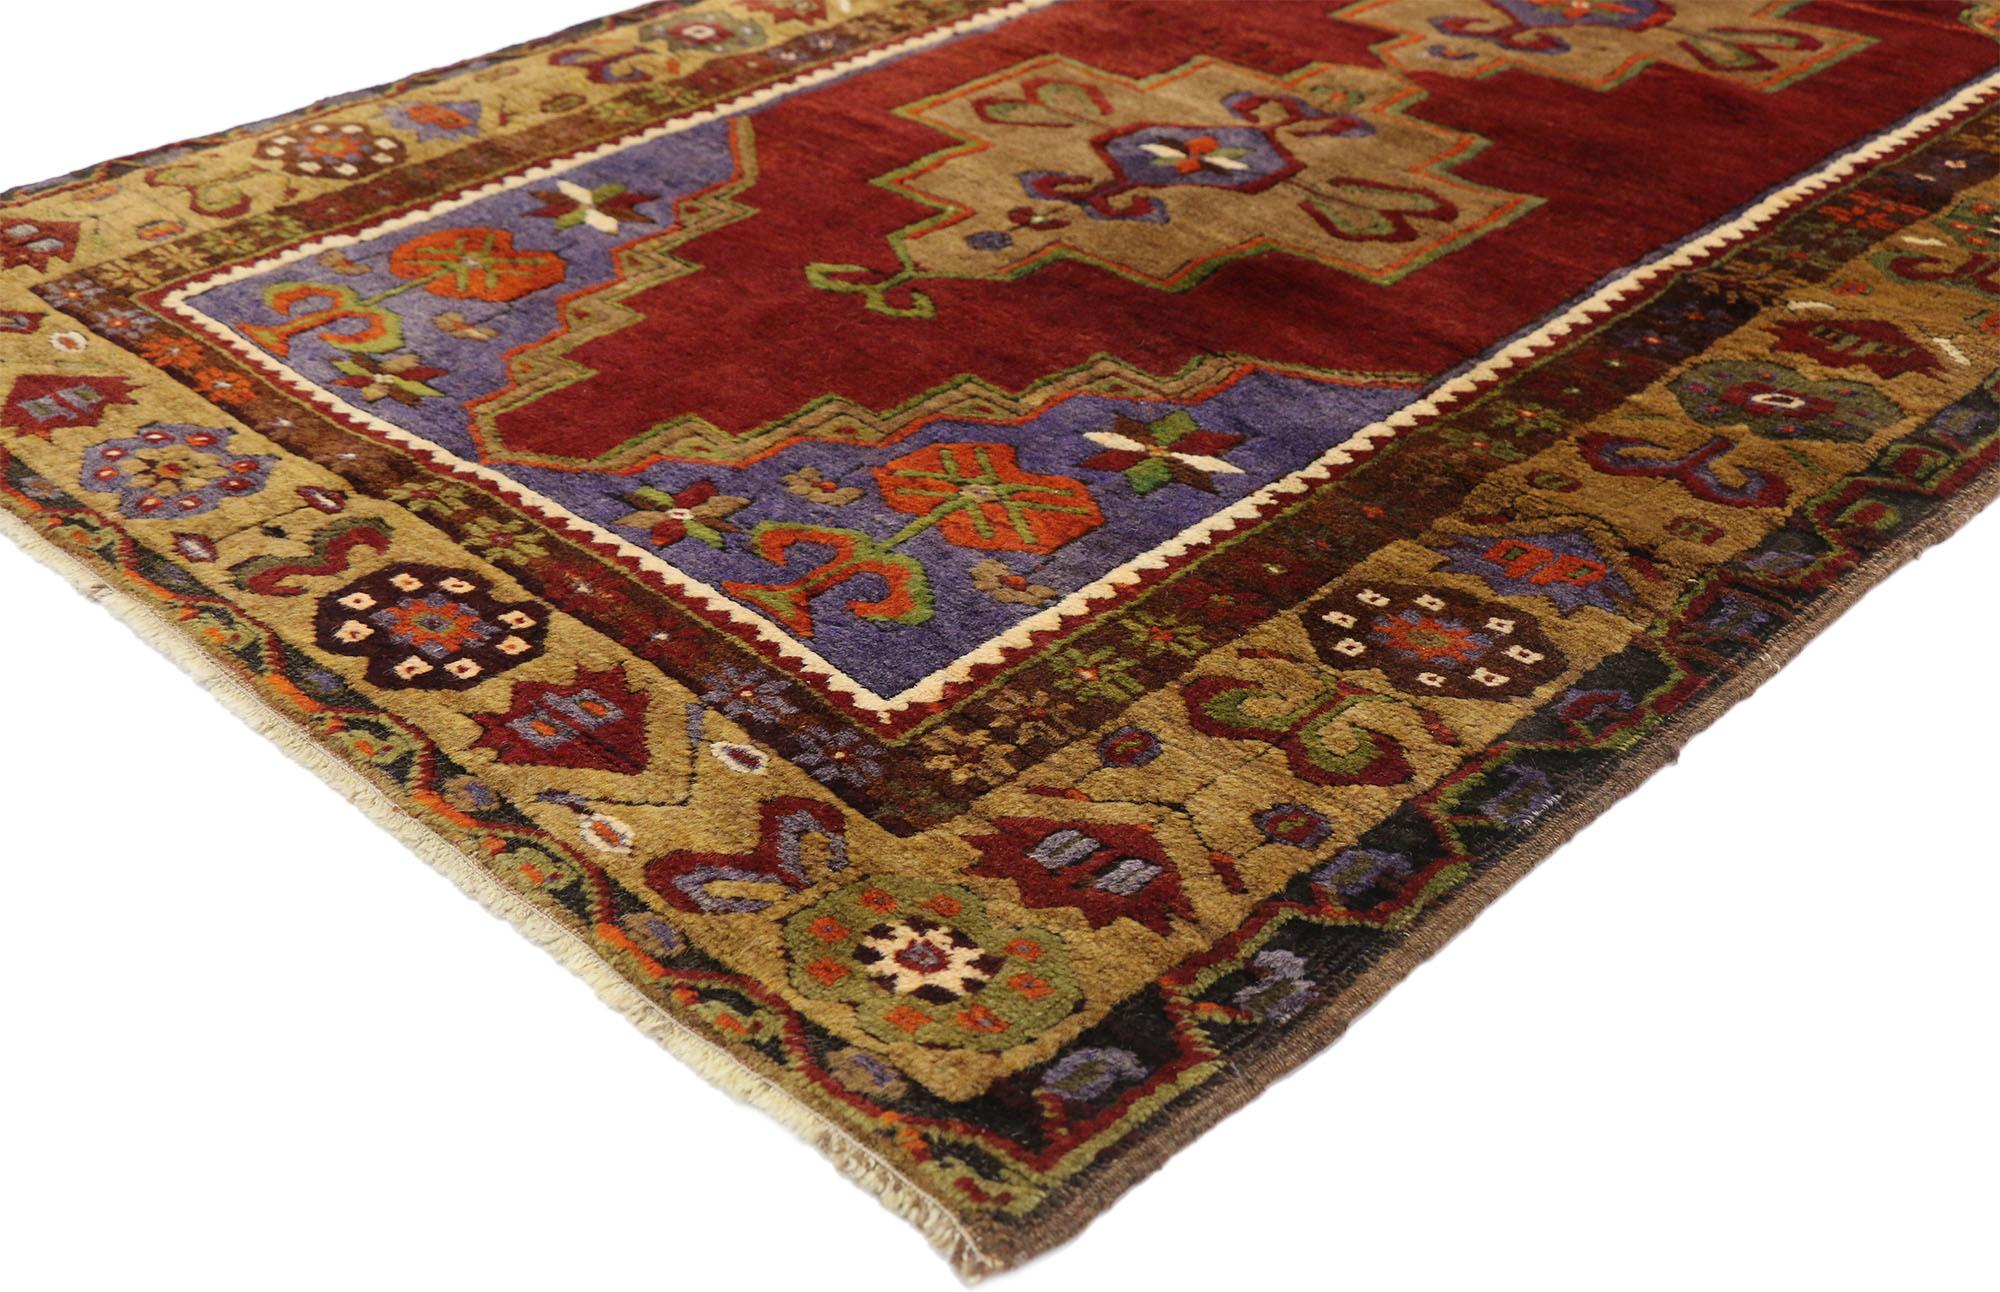 52446 Vintage Turkish Oushak Rug with Colorful Arts & Crafts Style 03'05 x 05'11. This hand knotted wool vintage Turkish Oushak rug features two connected stepped hexagonal medallions with ram’s Horn pendants floating on an abrashed ruby red field,